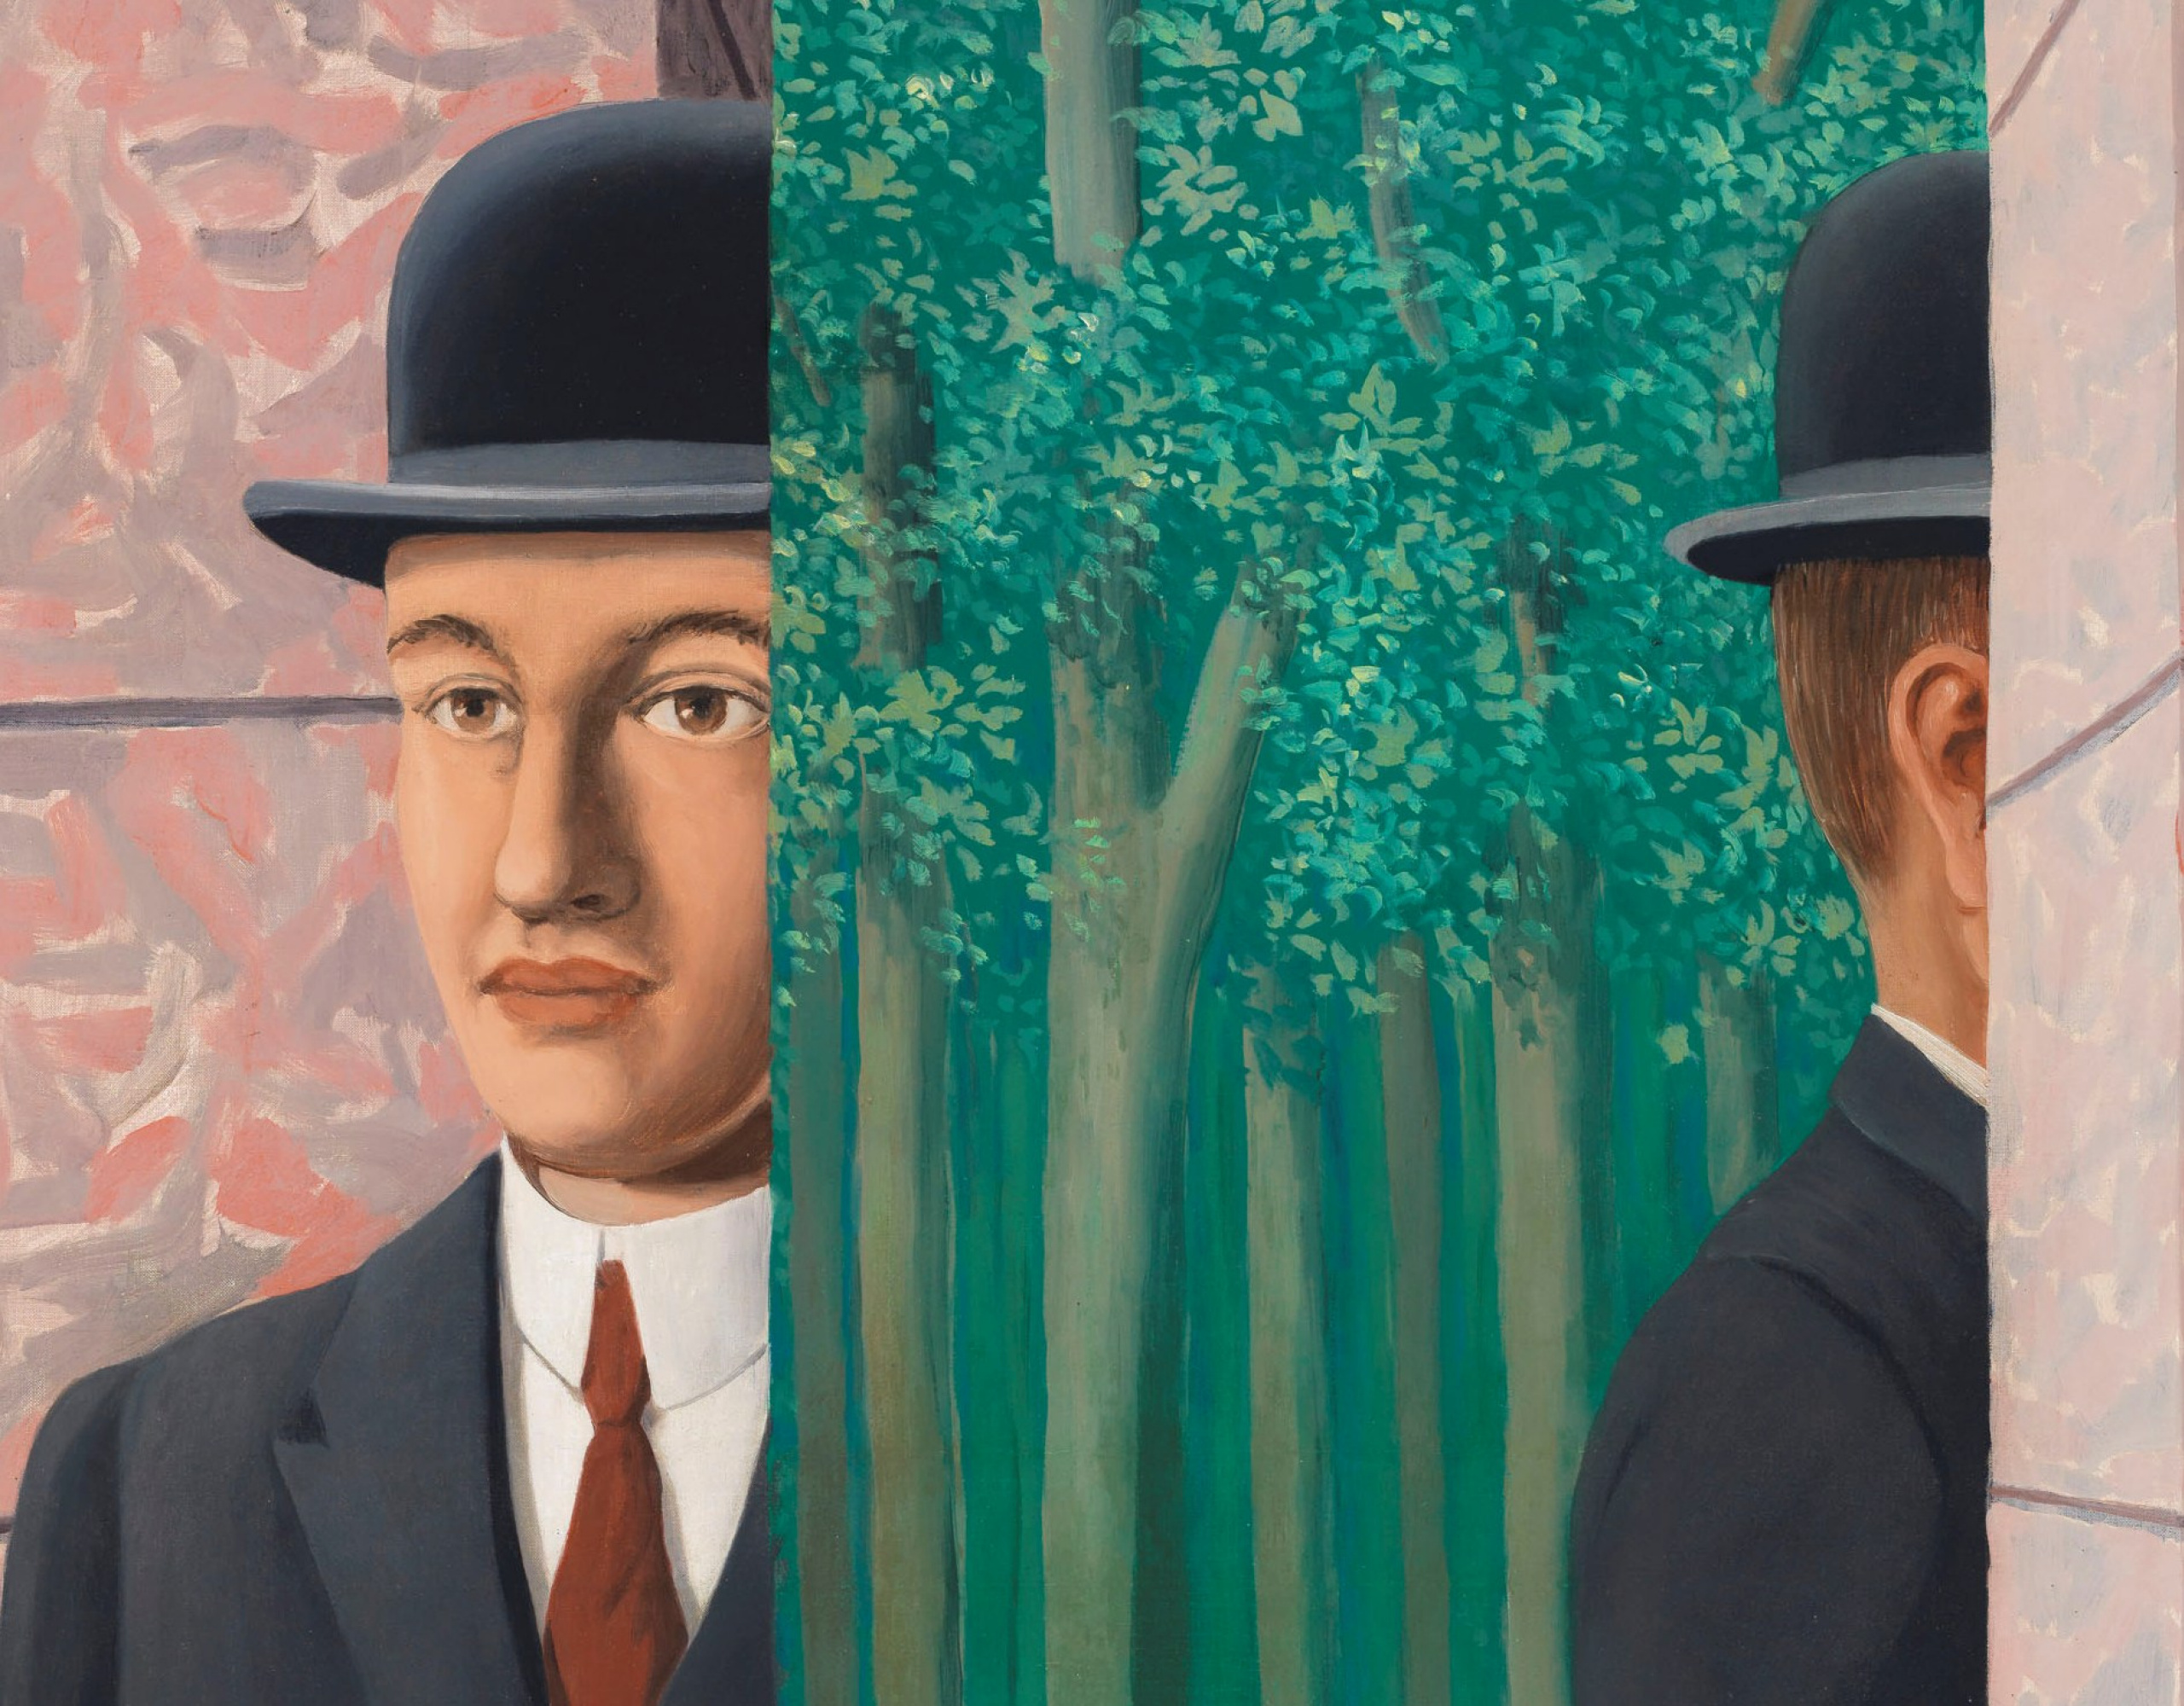 Kiks Derbeville test Venlighed Not the apple, but the bowler hat: 5 most expensive paintings by René  Magritte | Arthive